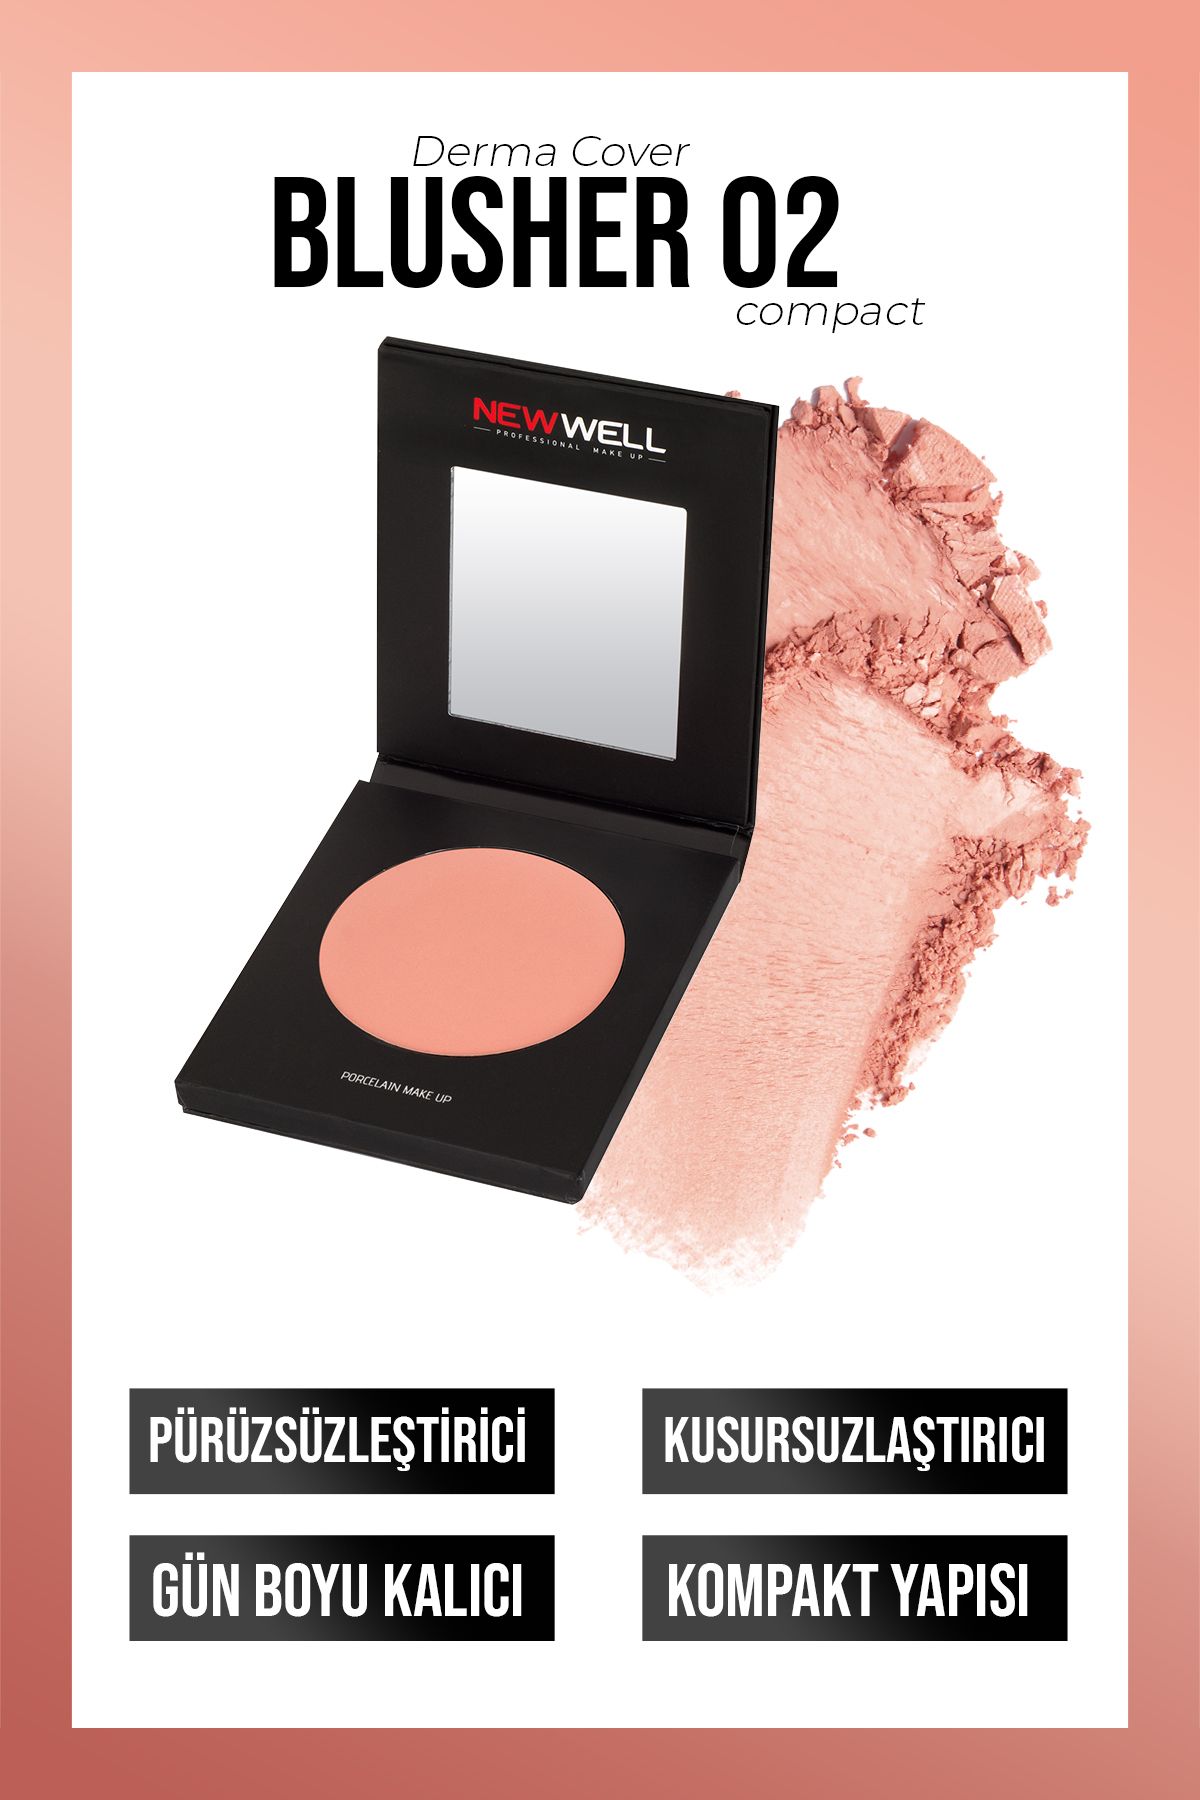 New Well Derma Cover Blusher 02